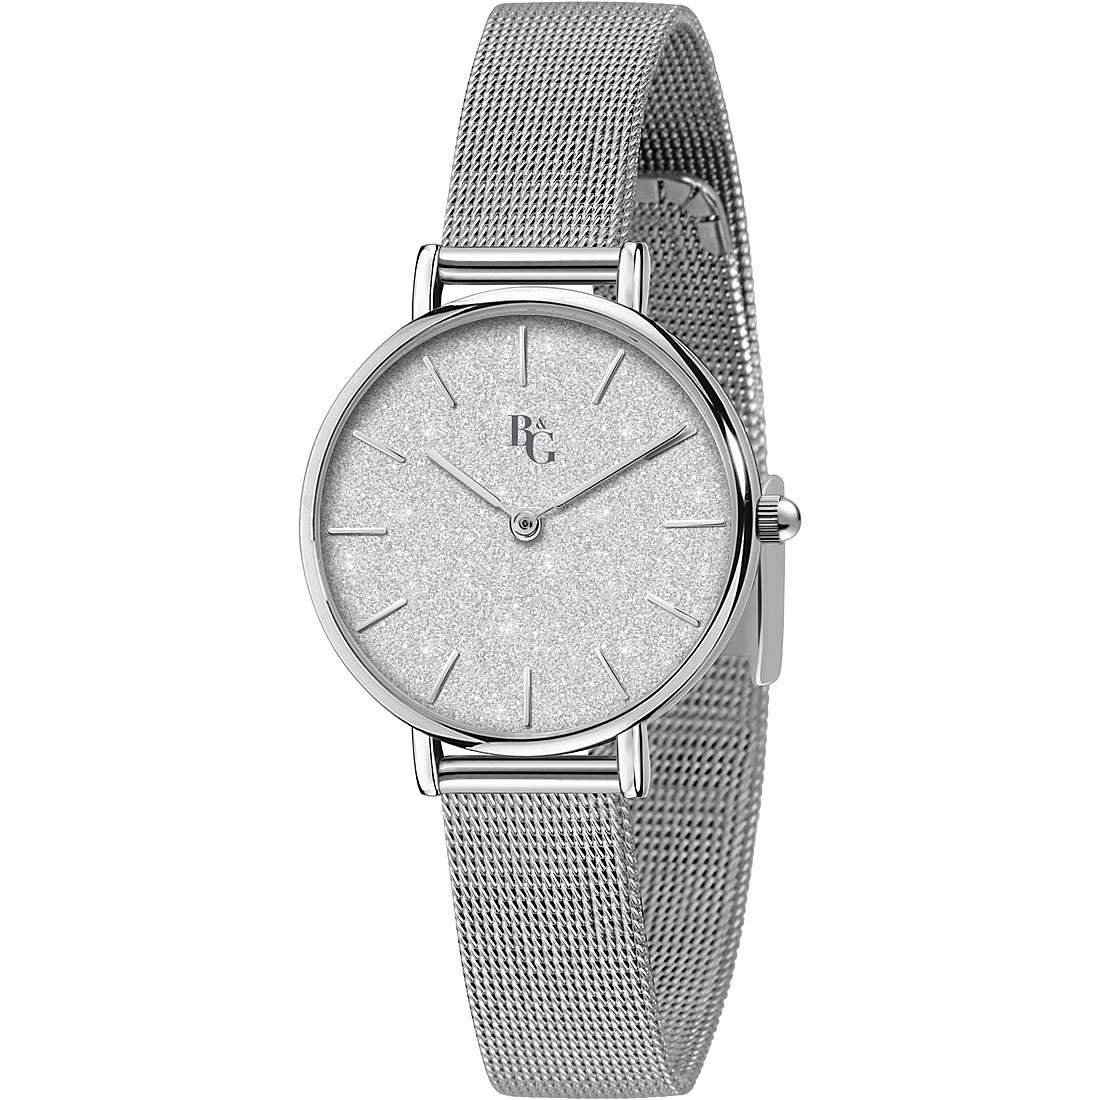 only time watch Metal Silver dial woman Preppy R3853252531